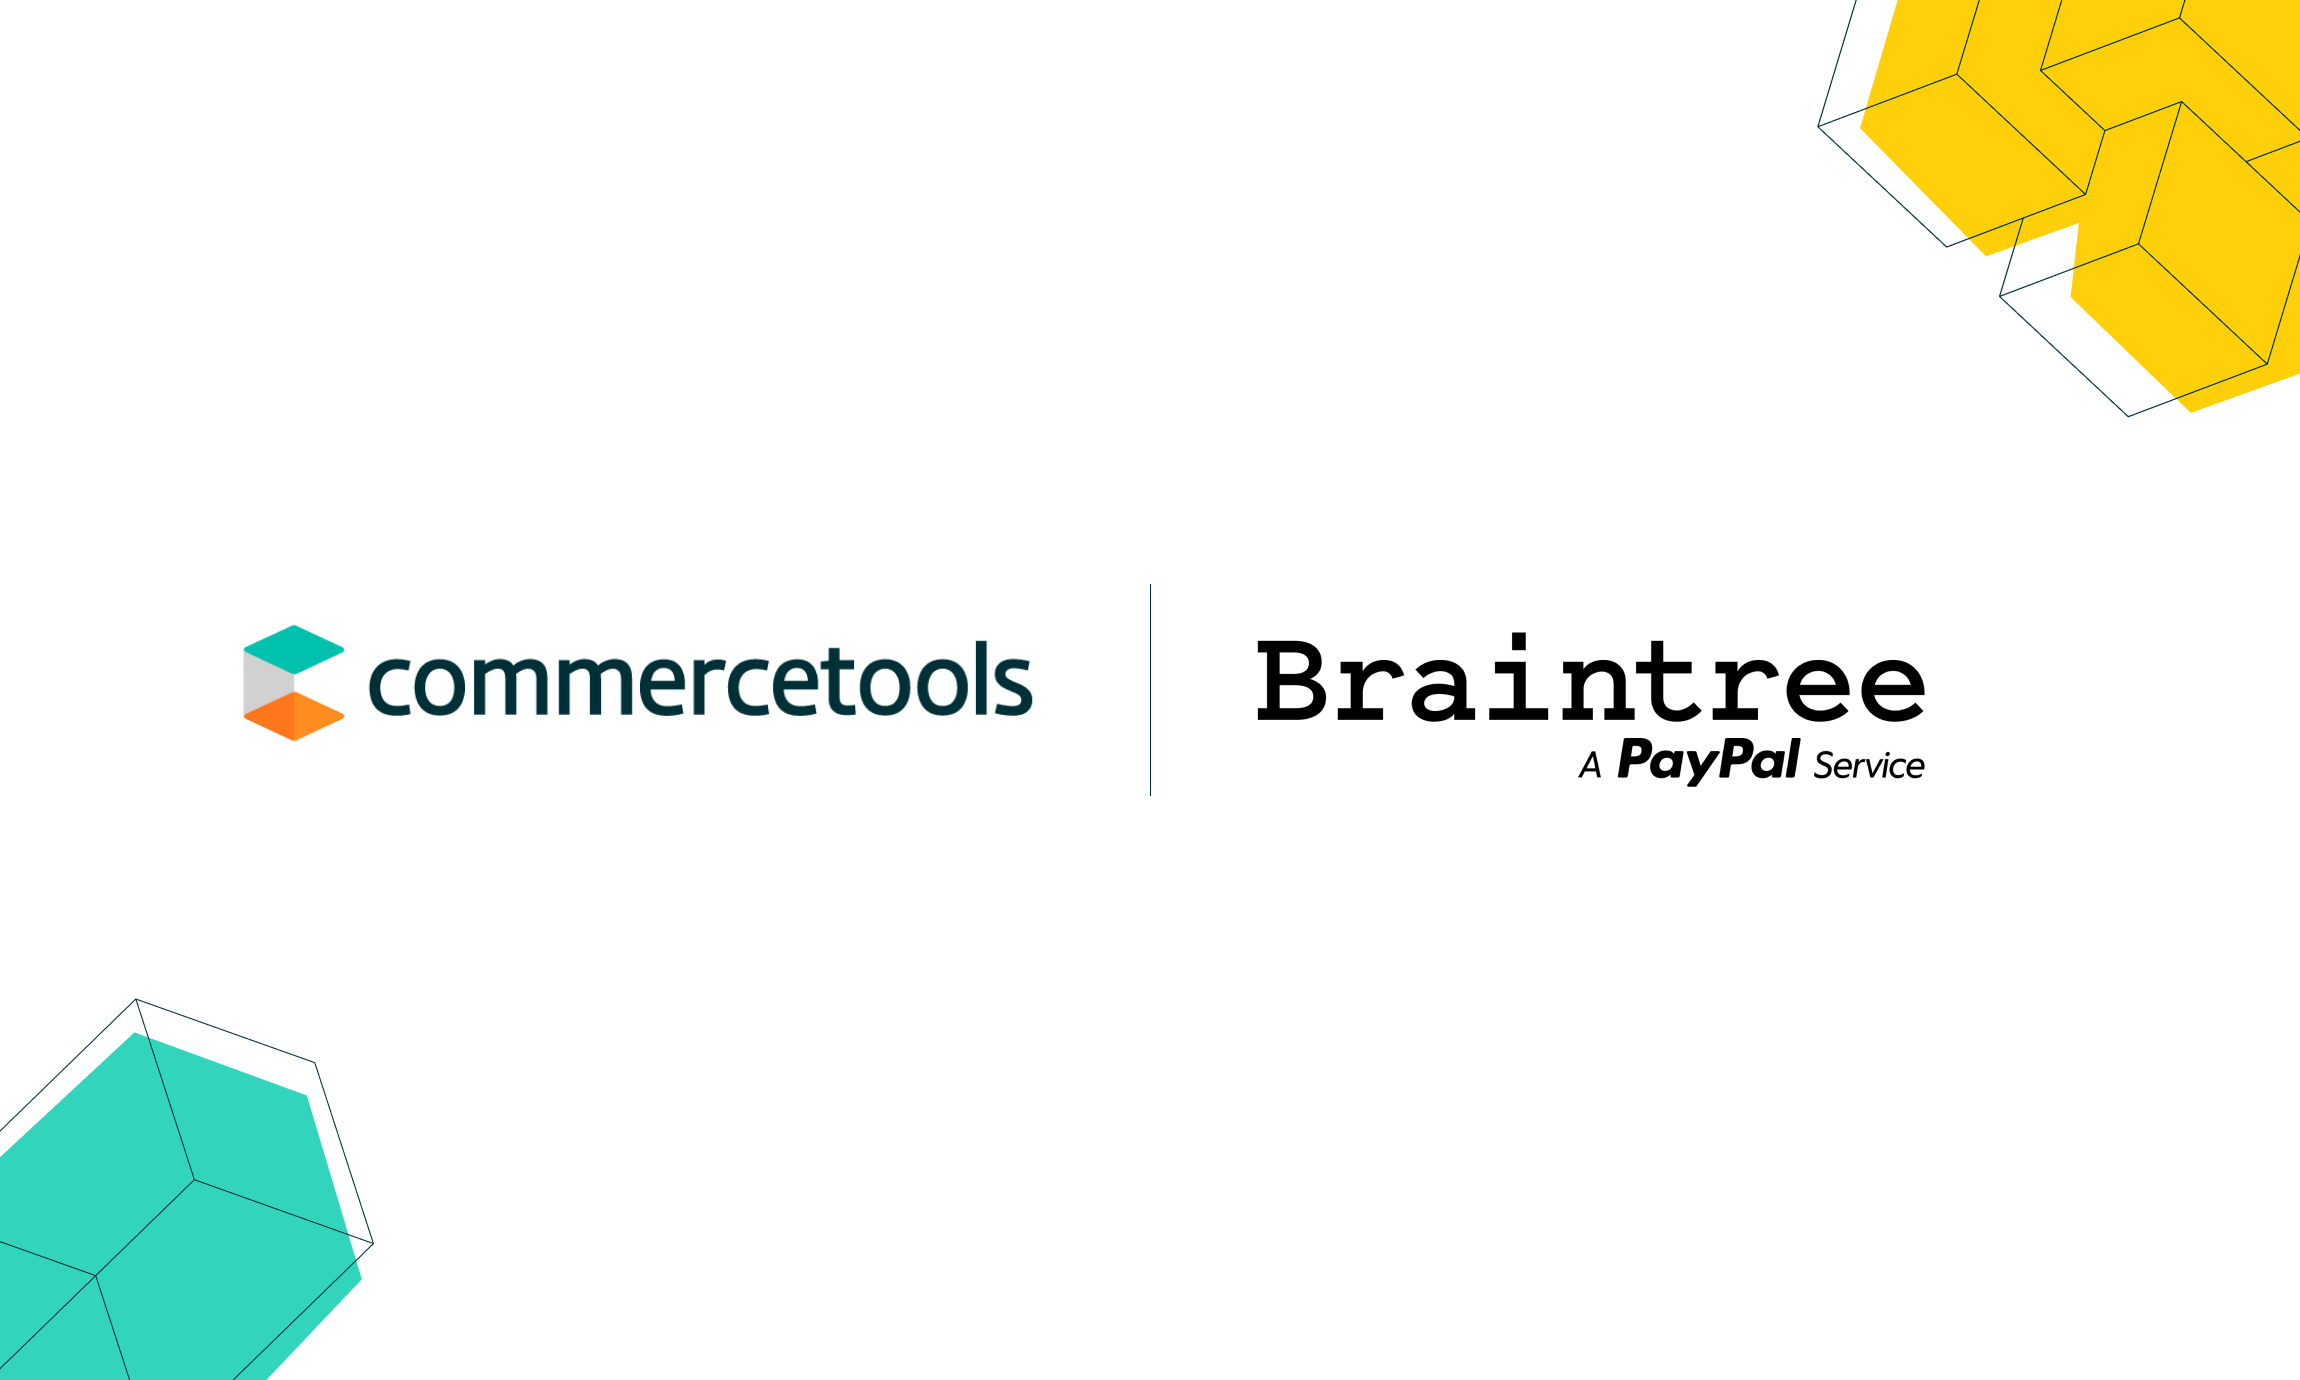 commercetools Collaborates with PayPal Braintree to Power Expanded Checkout Experiences for Consumers